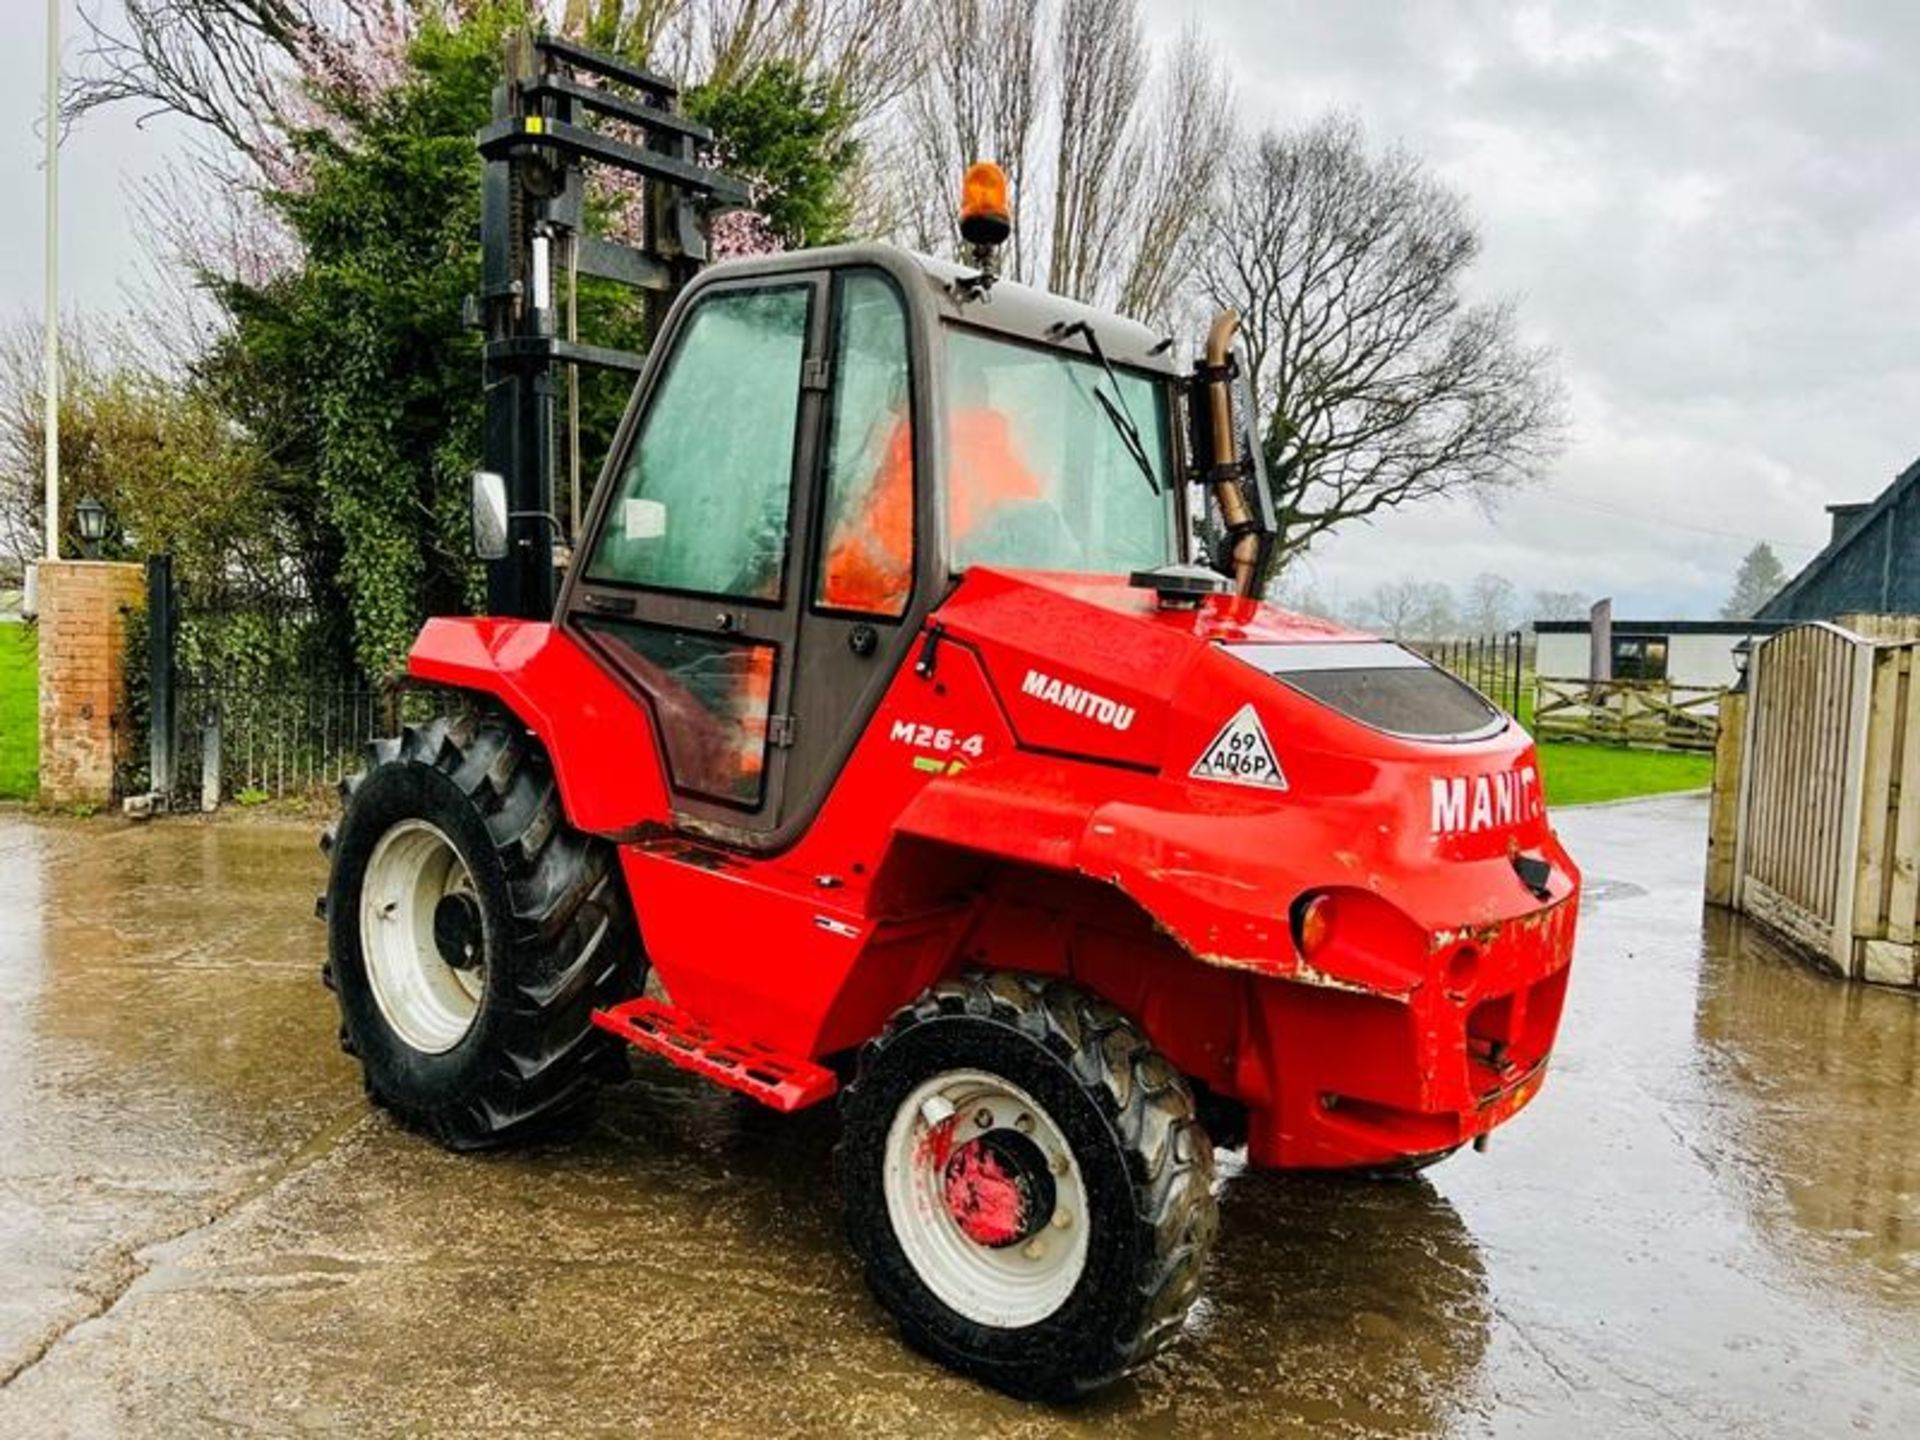 MANITOU M26-4 ROUGH TERRIAN 4WD FORKLIFT *YEAR 2017* C/W PALLET TINES - Image 11 of 15